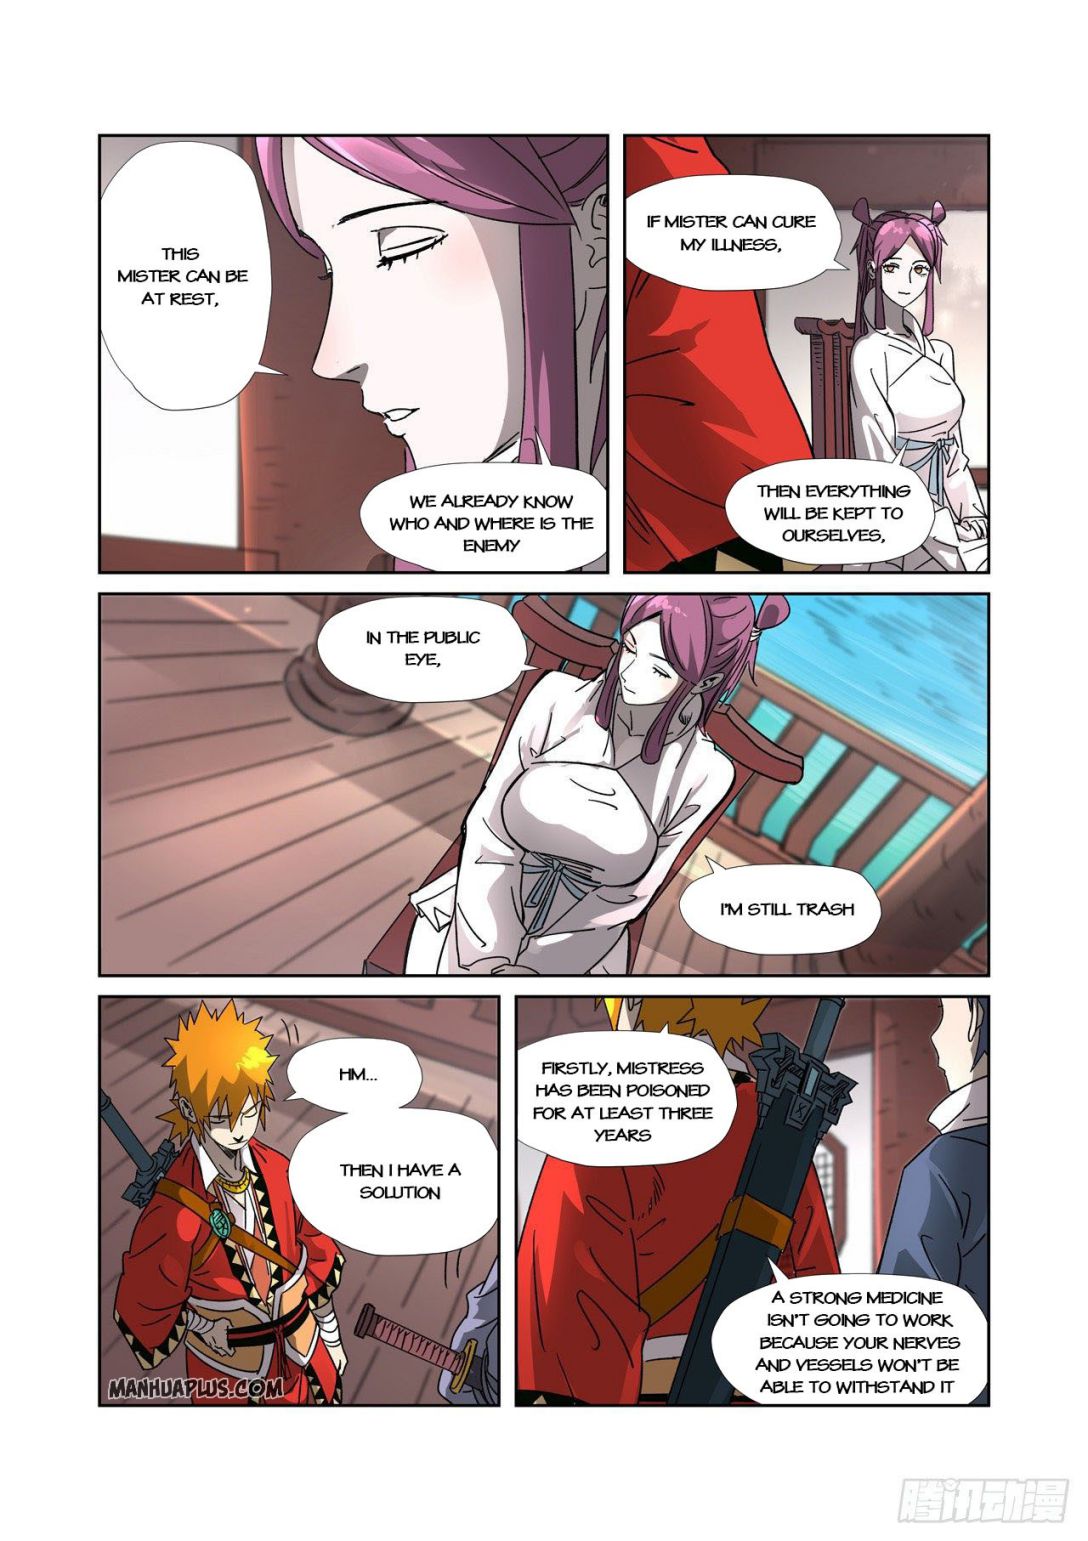 Tales of Demons and Gods chapter 307.5 page 7